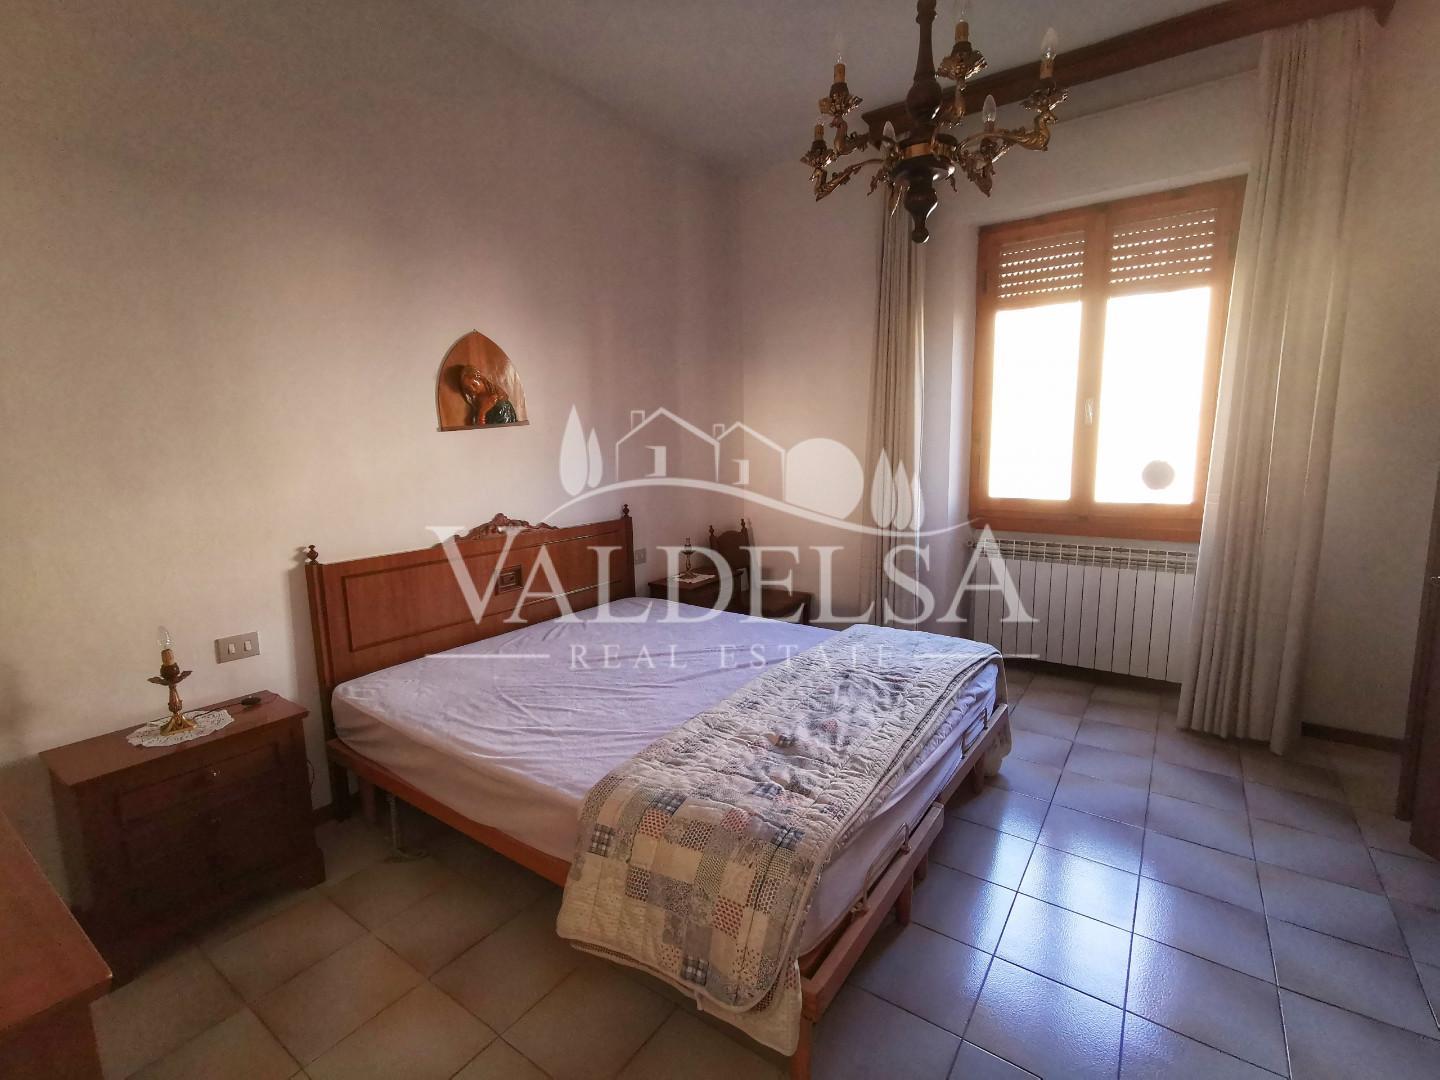 Apartment for sale, ref. 598